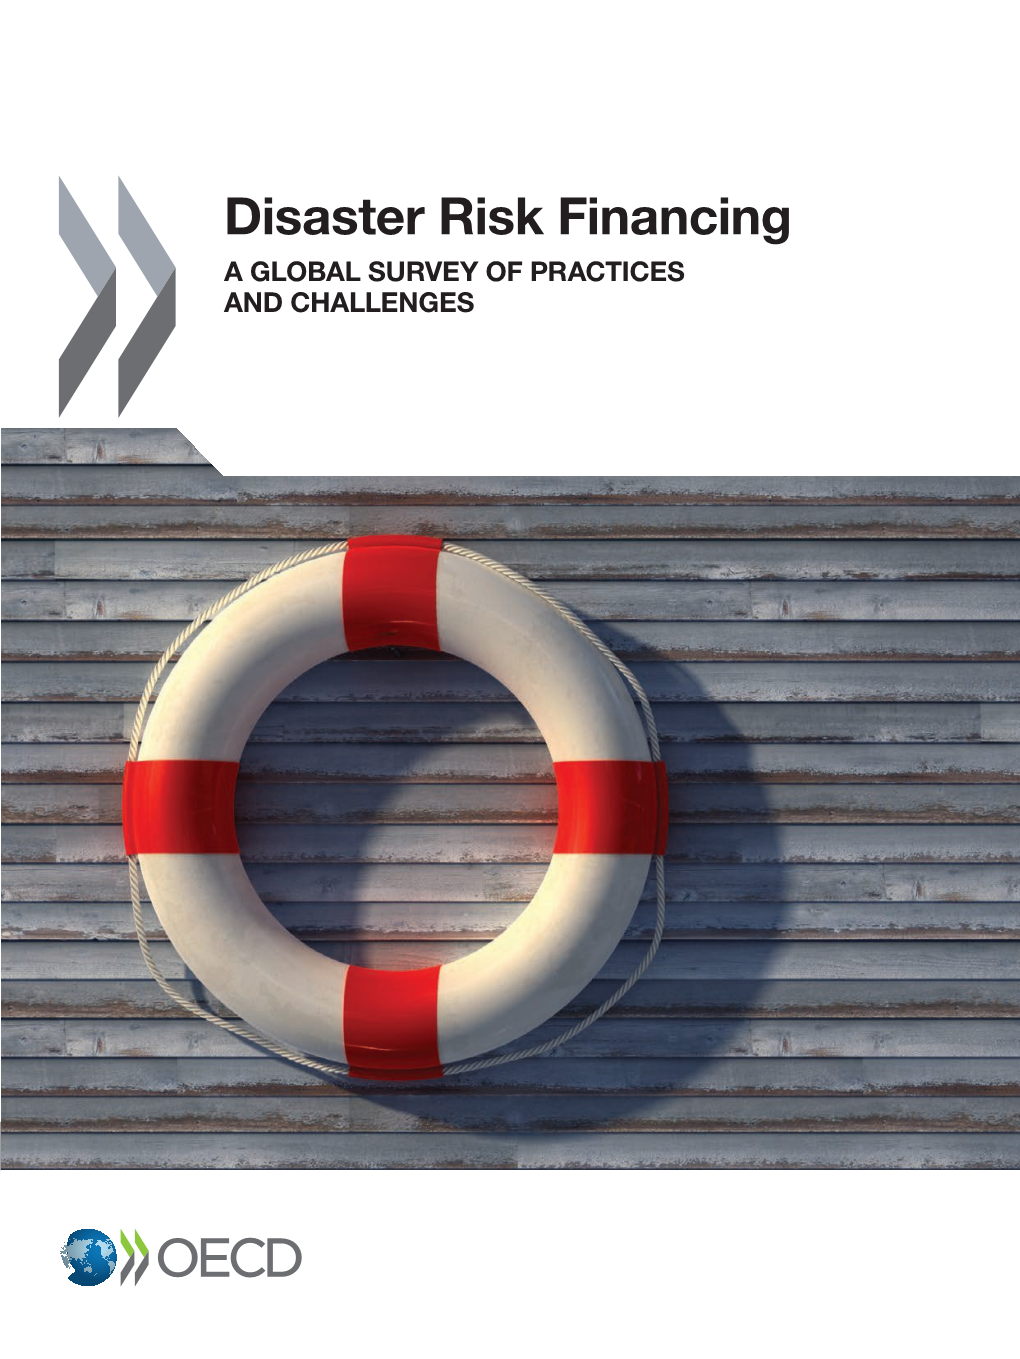 Disaster Risk Financing a Global Survey of Practices and Challenges